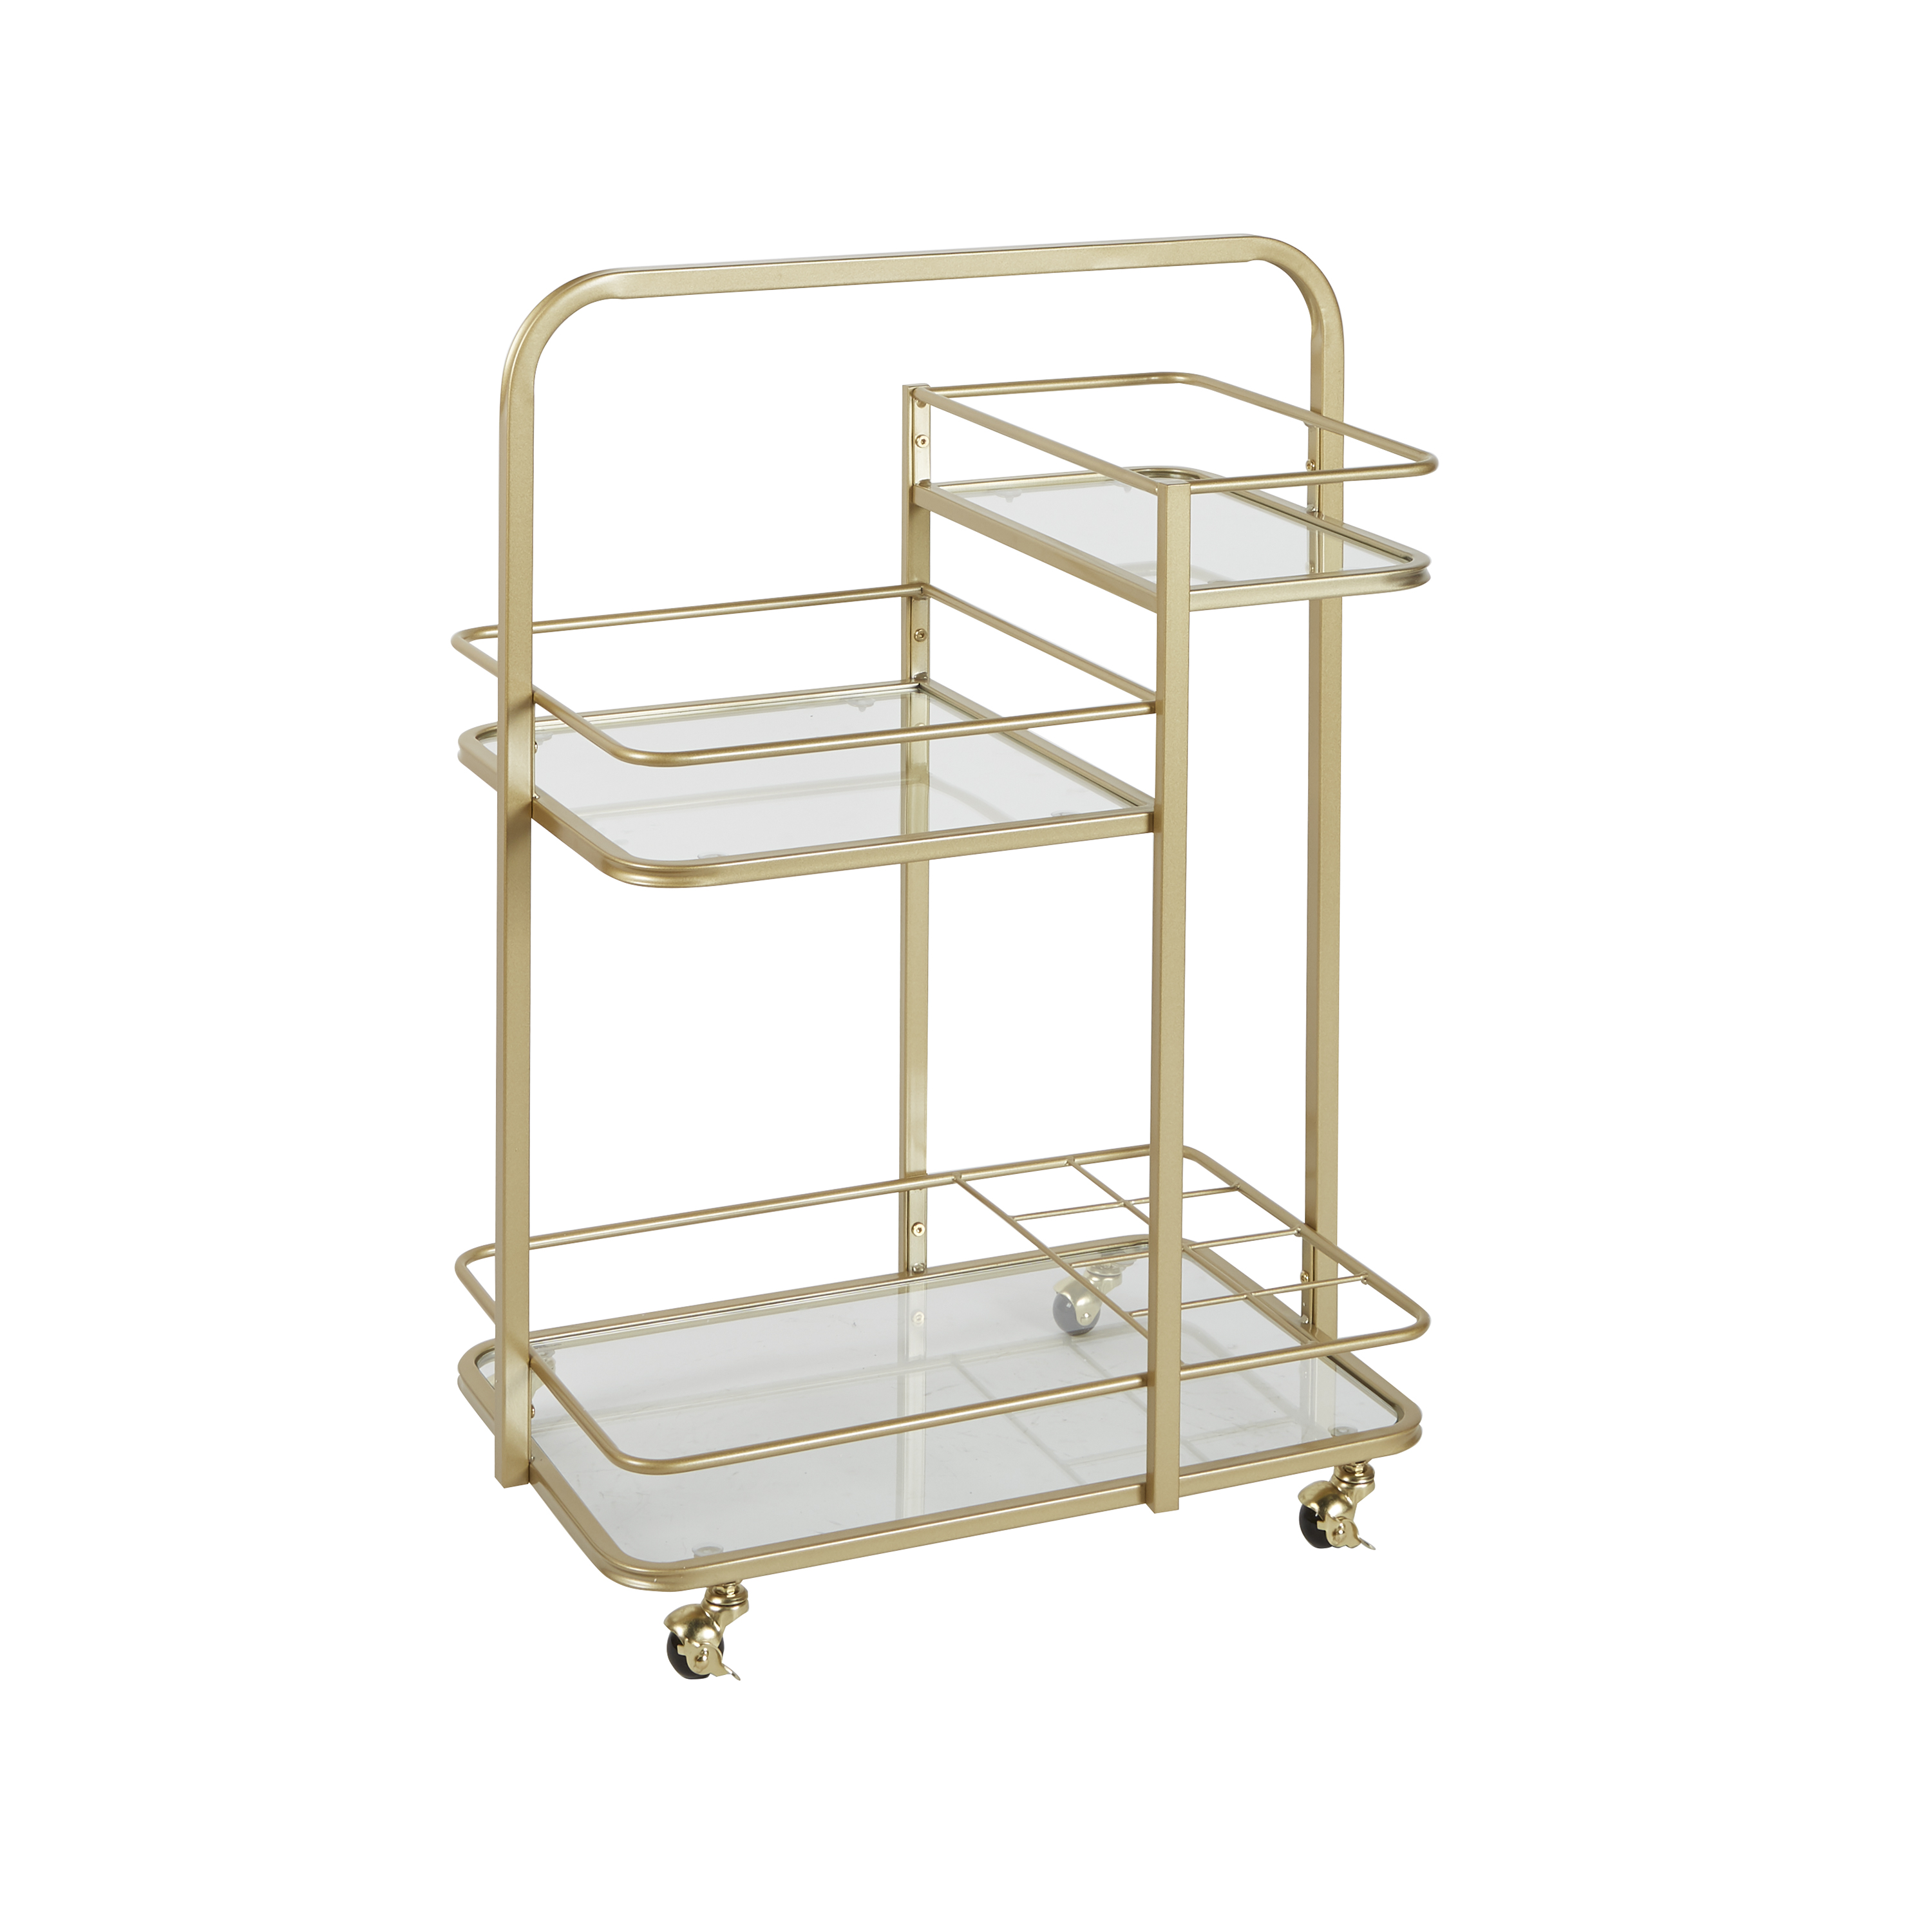 Adornments Gold Metal Serving Barcart with 3 Glass Shelves - image 2 of 6